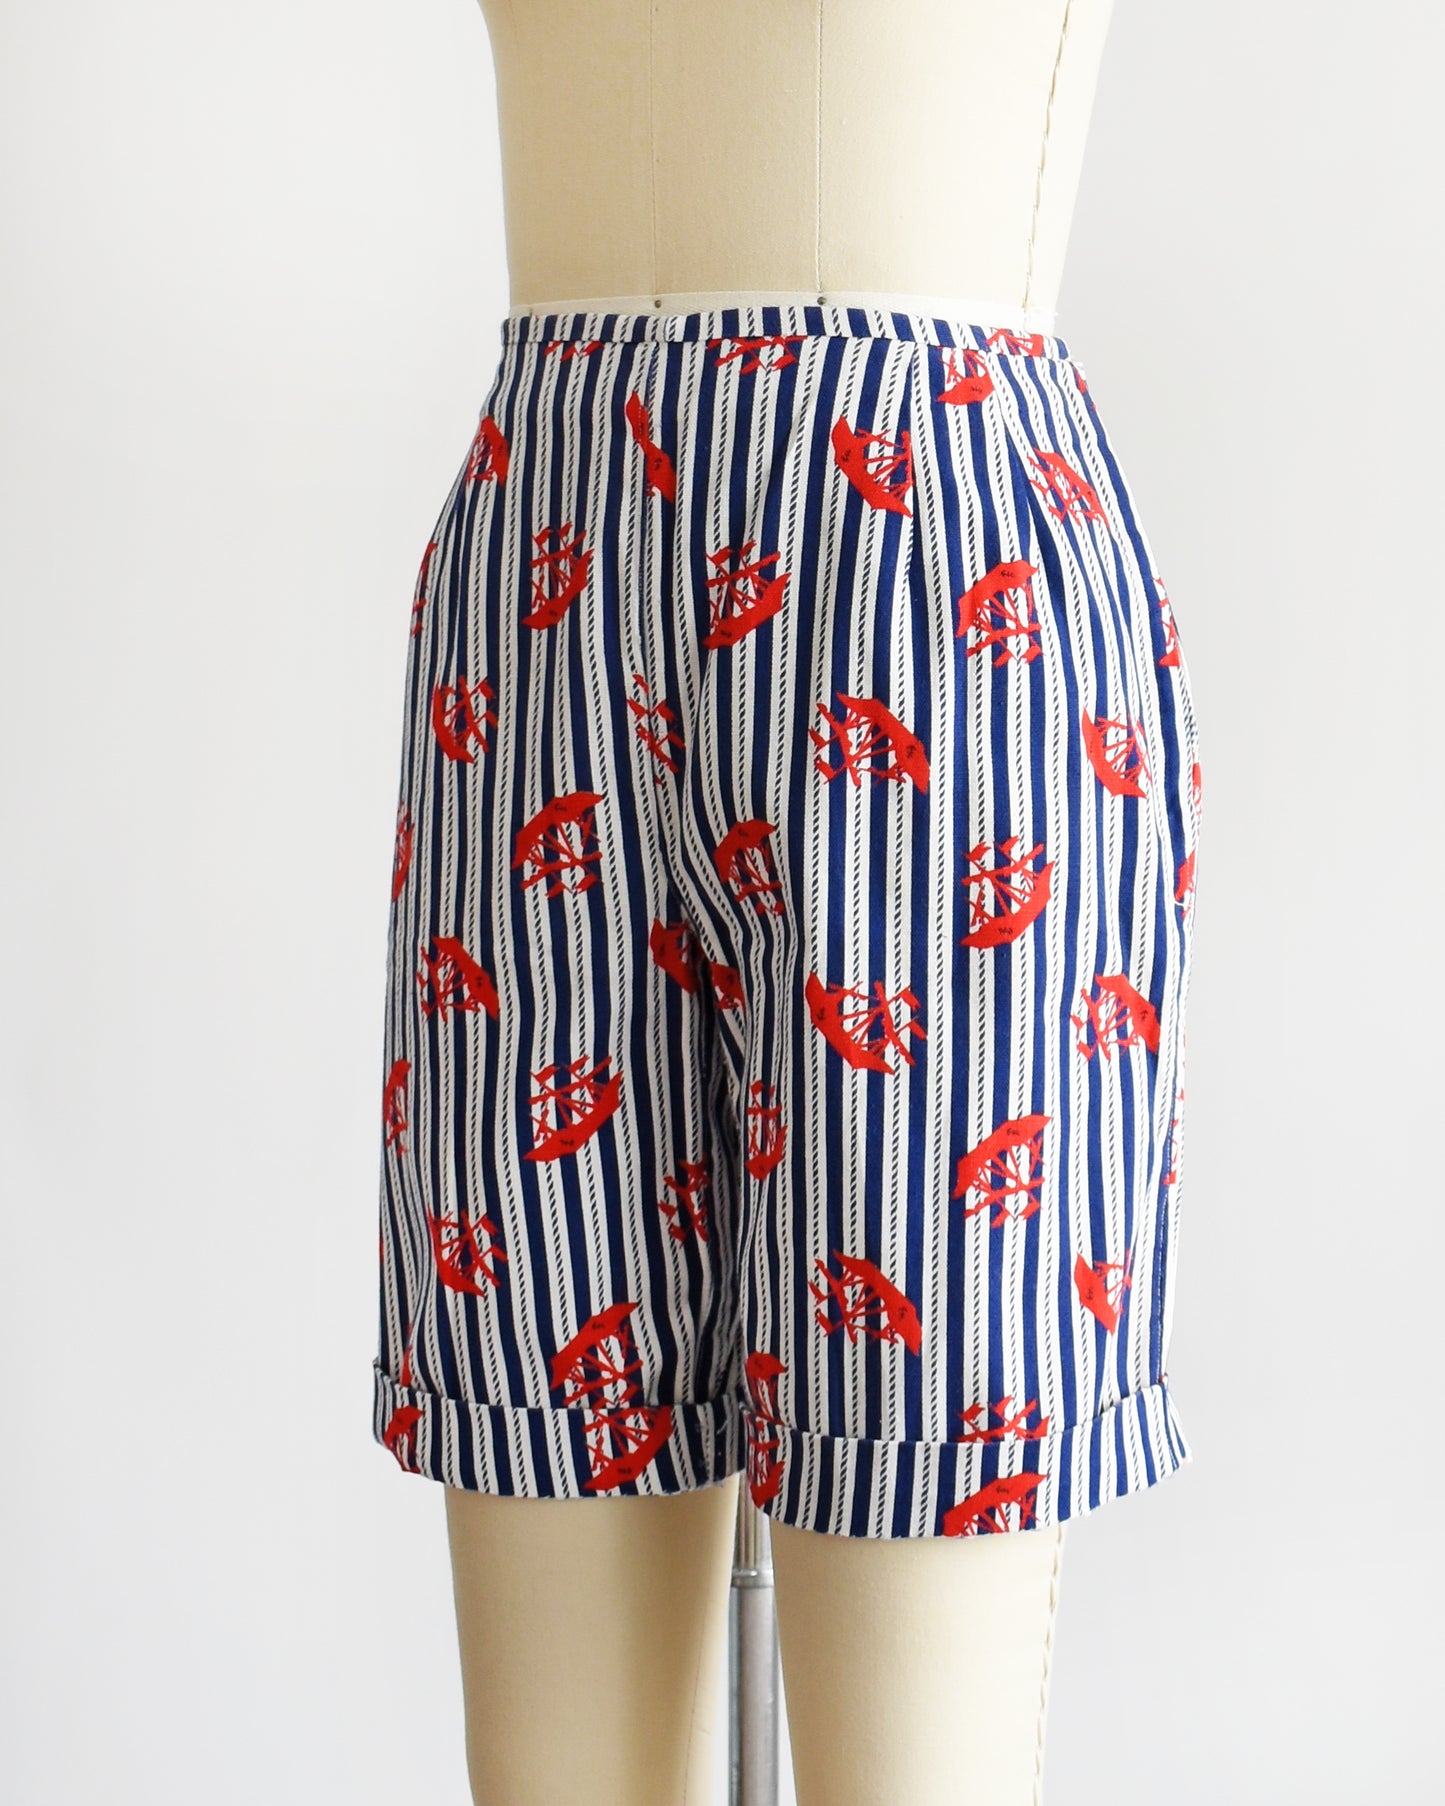 Side front view of a pair of vintage 60s shorts that are navy blue and white vertical striped with a red clipper ship print. The shorts are modeled on a dress form. The shorts are cuffed.